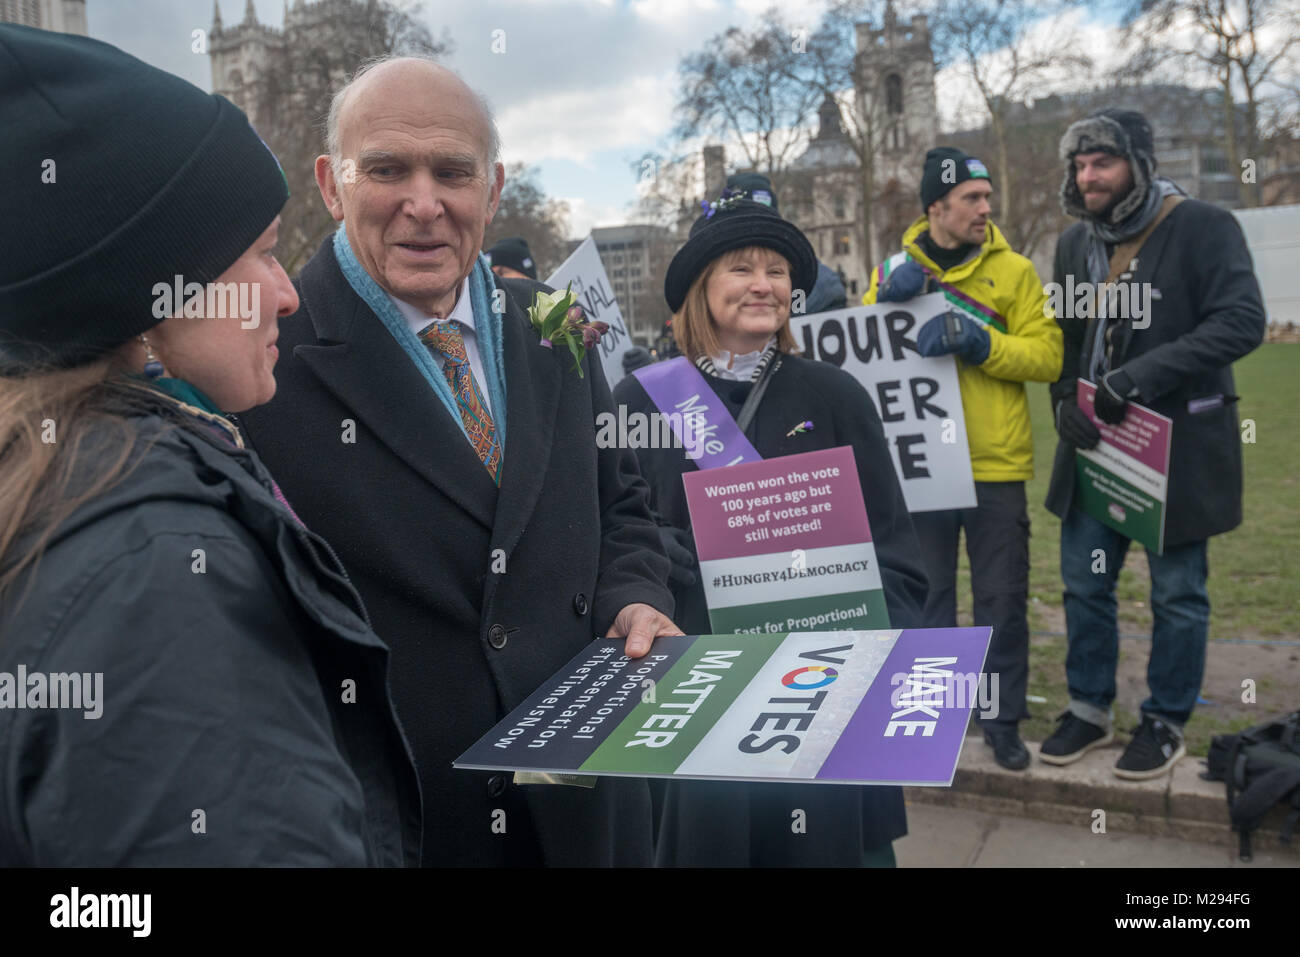 London, UK. 5 February 2018.  Vince Cable talks with other campaigners posing in Parliament Square as hundreds of fair vote campaigners take part in a 24 hour hunger strike organised by Make Votes Matter (MVM) in protest against our dysfunctional electoral system and to urge Proportional Representation.  The event took place on the centenary of the 1918 the Representation of the People Act when for the first time some women and all men over 21 in the UK gained the right to vote. MVM point out that although now everyone can vote, for over two thirds of us our vote has no effect on the result, ' Stock Photo